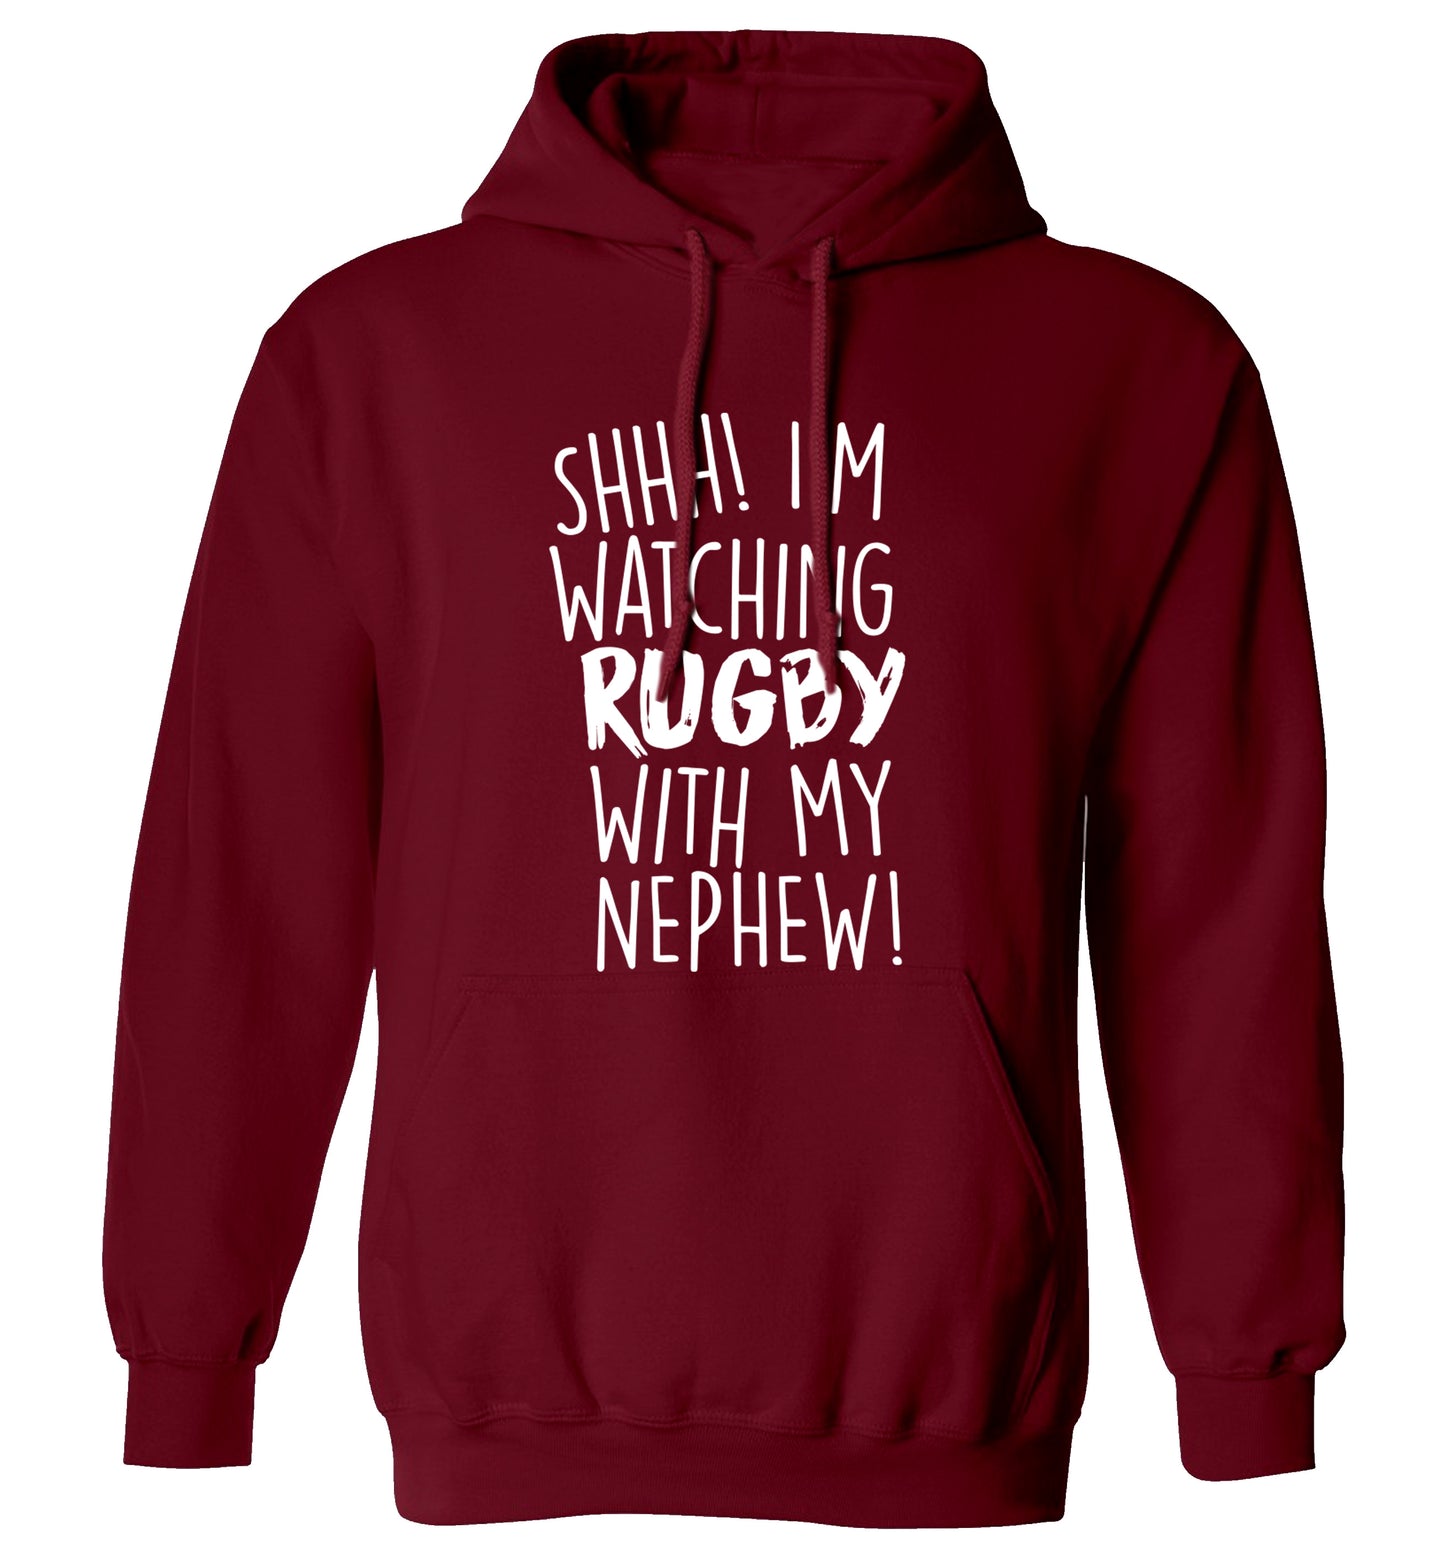 Shh.. I'm watching rugby with my nephew adults unisex maroon hoodie 2XL